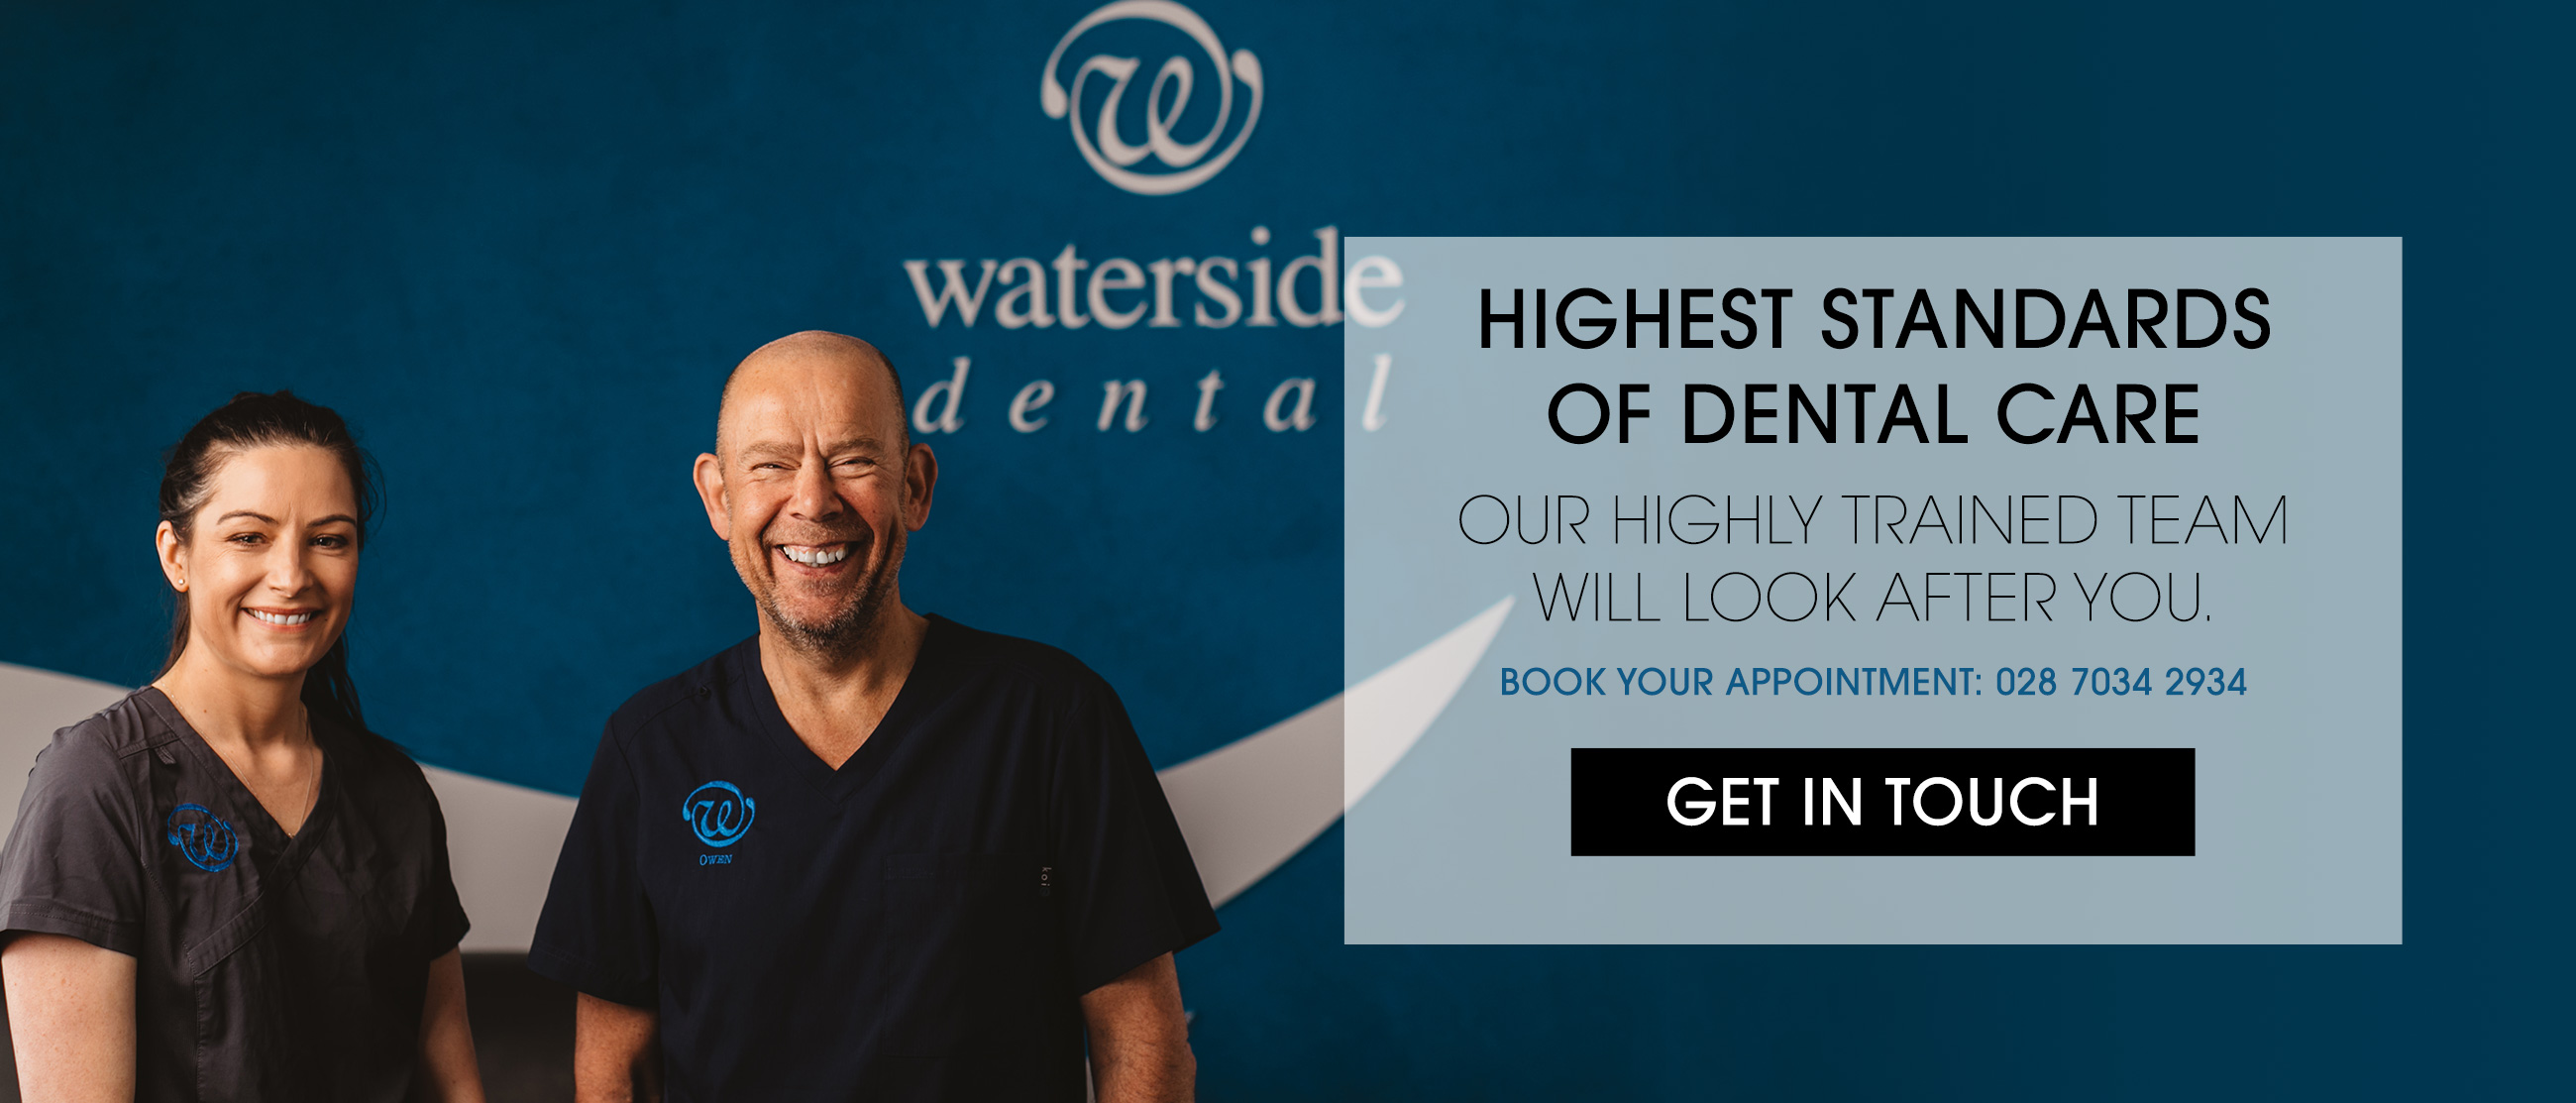 Welcome to Waterside Dental